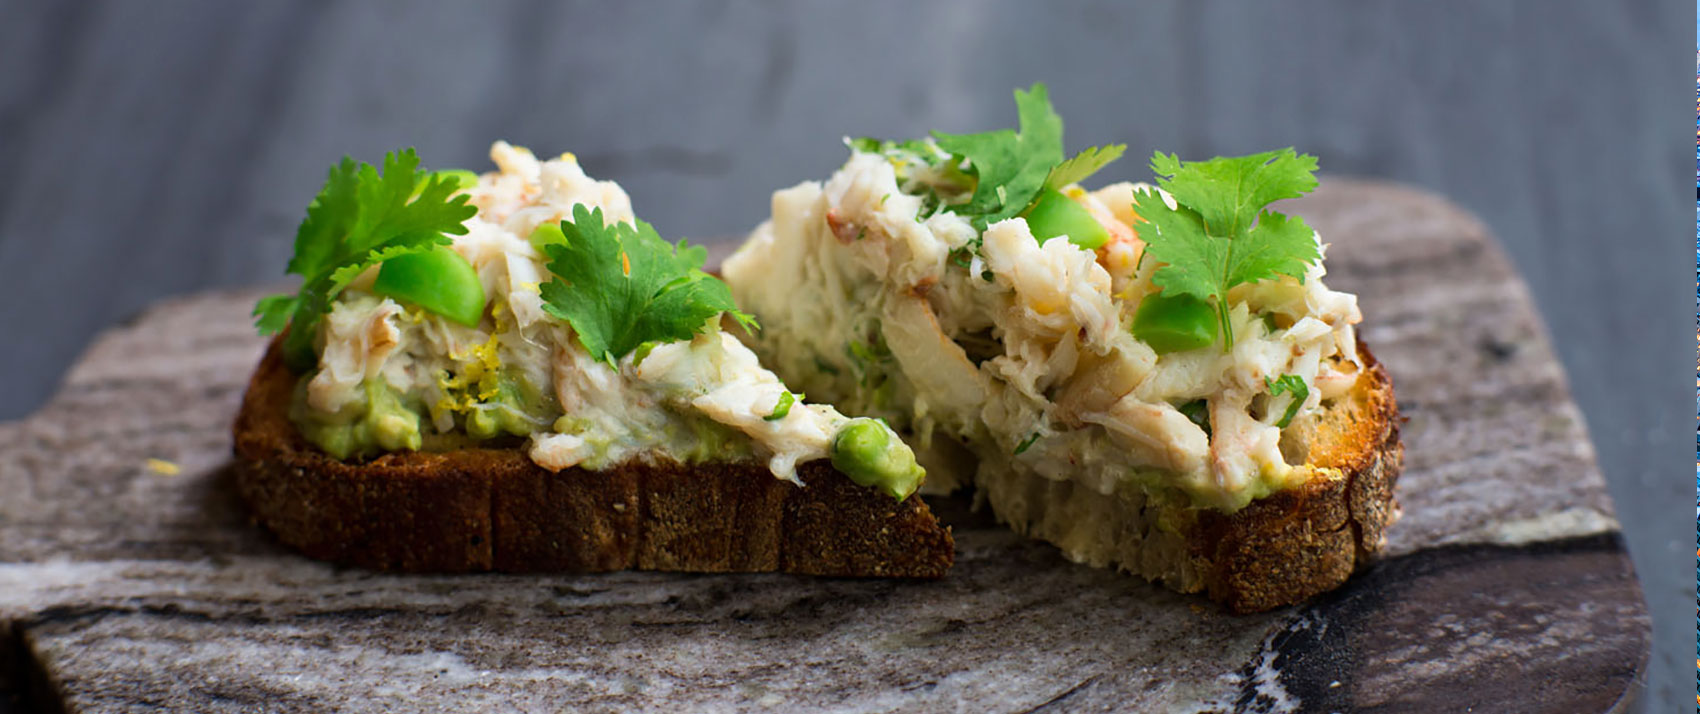 Toast with avocado, herbs, and seafood on top